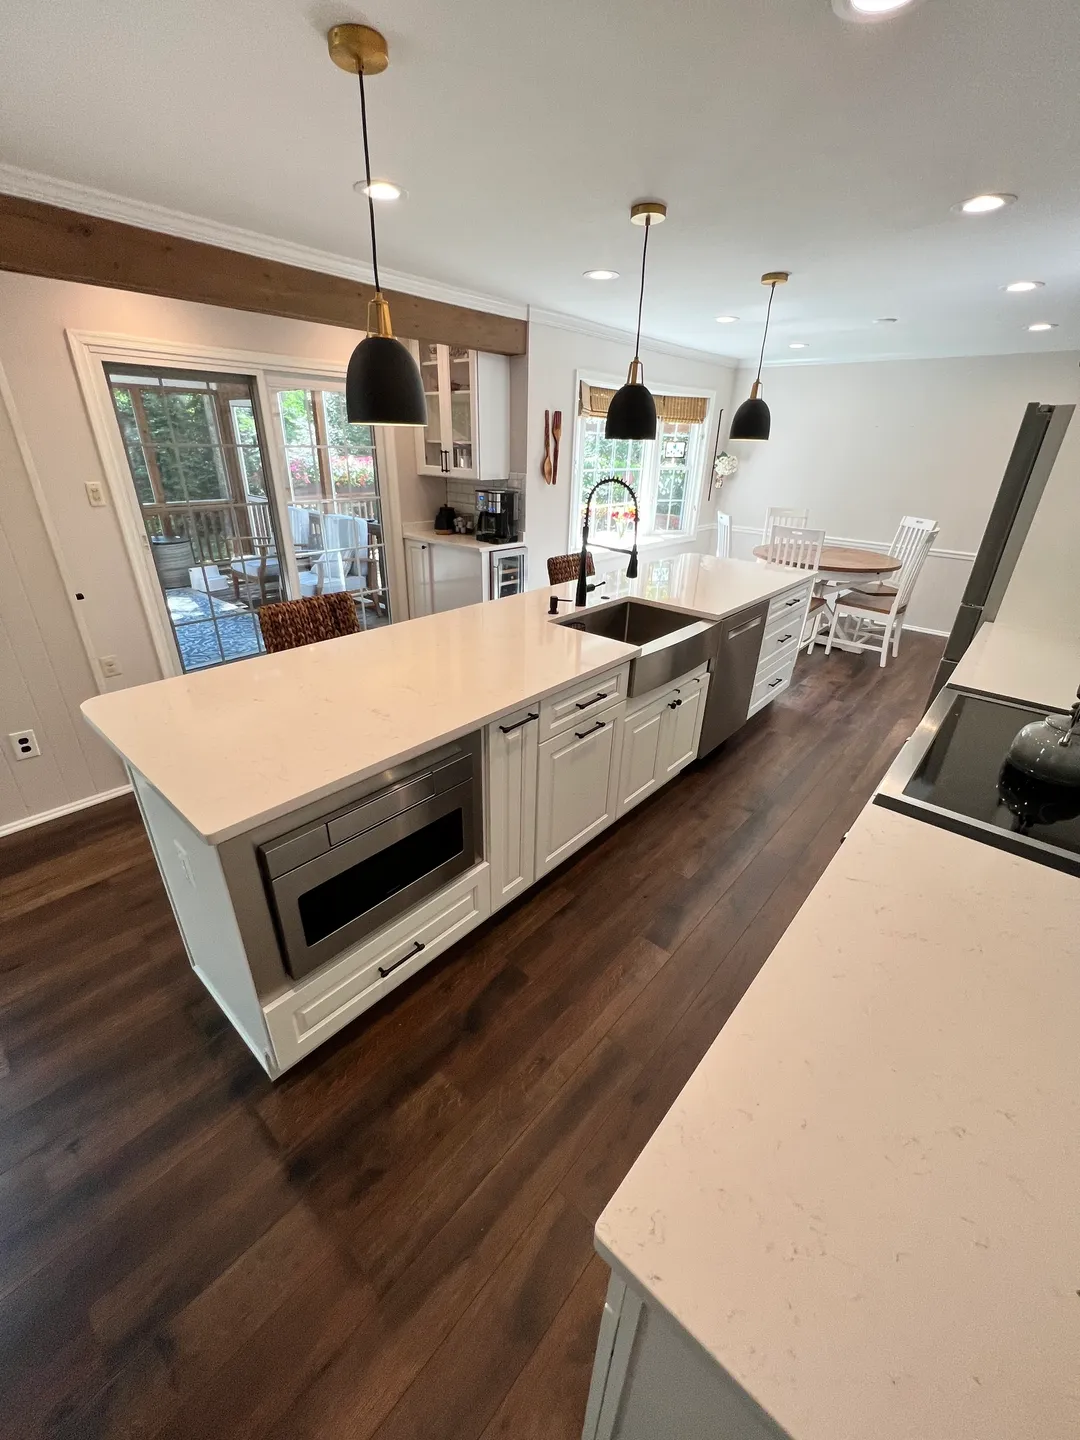 A kitchen with an island and wooden floors